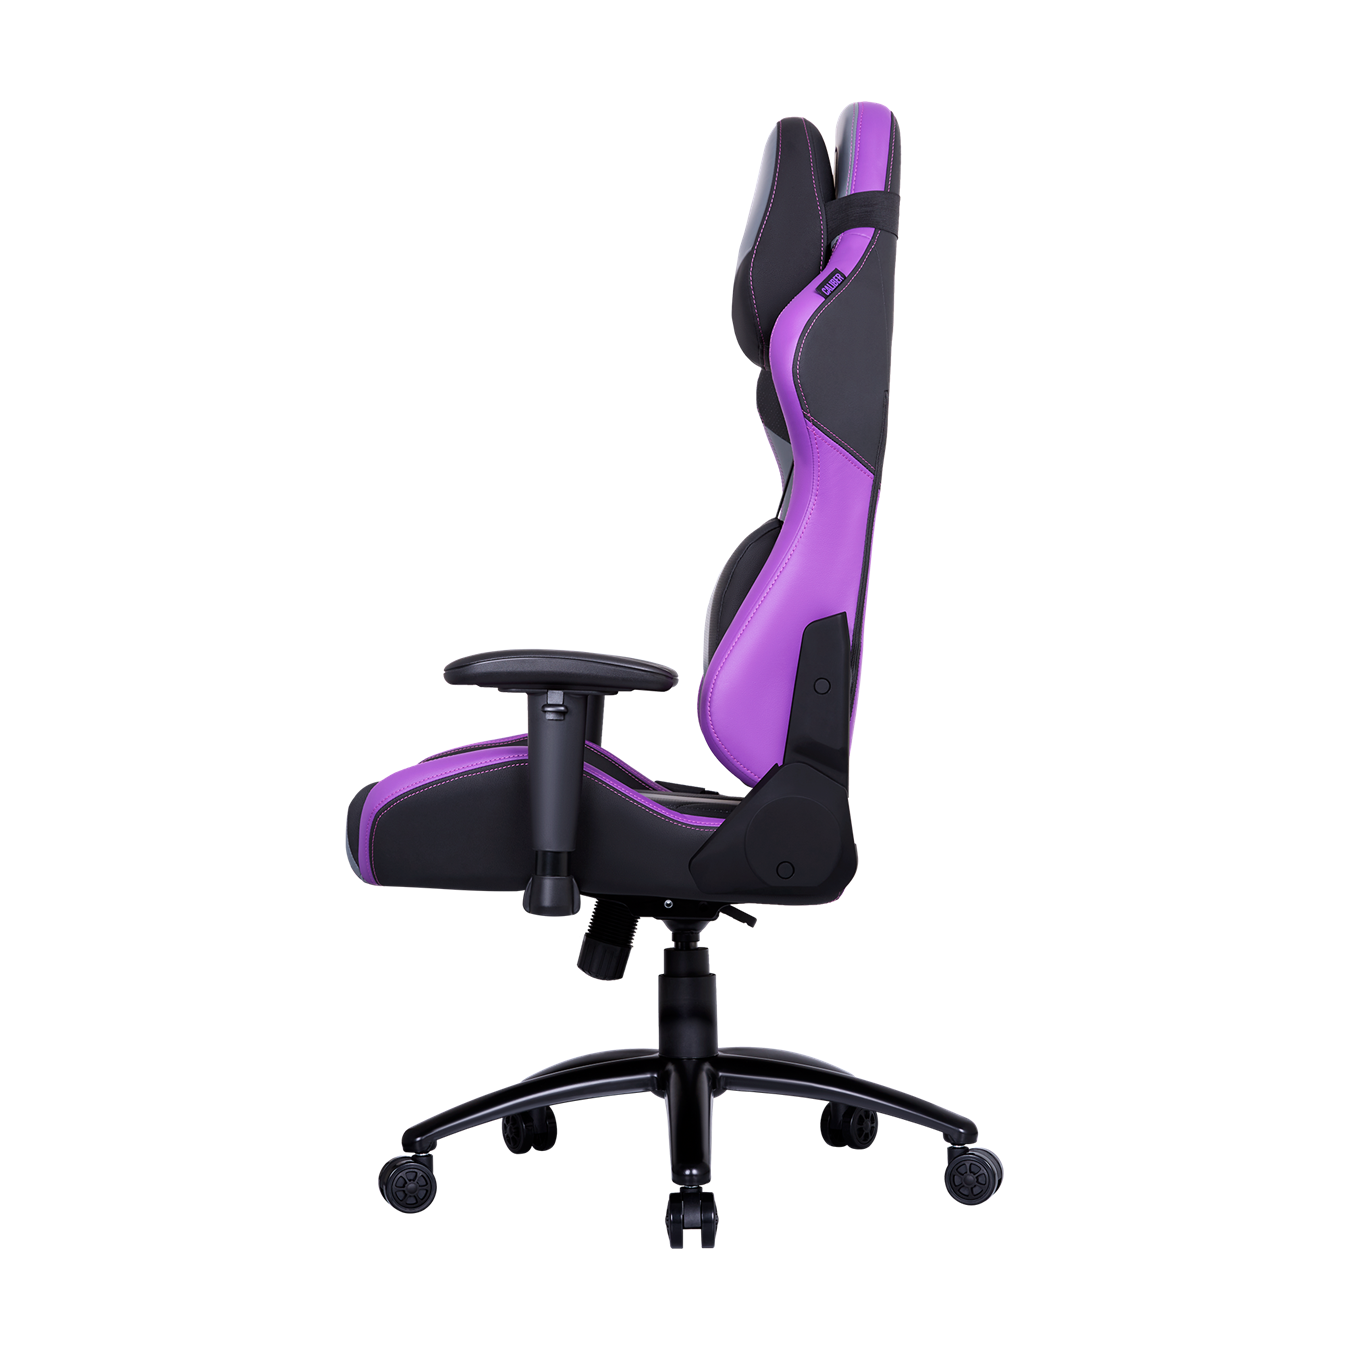 COOLER MASTER CALIBER R3 GAMING CHAIR PURPLE